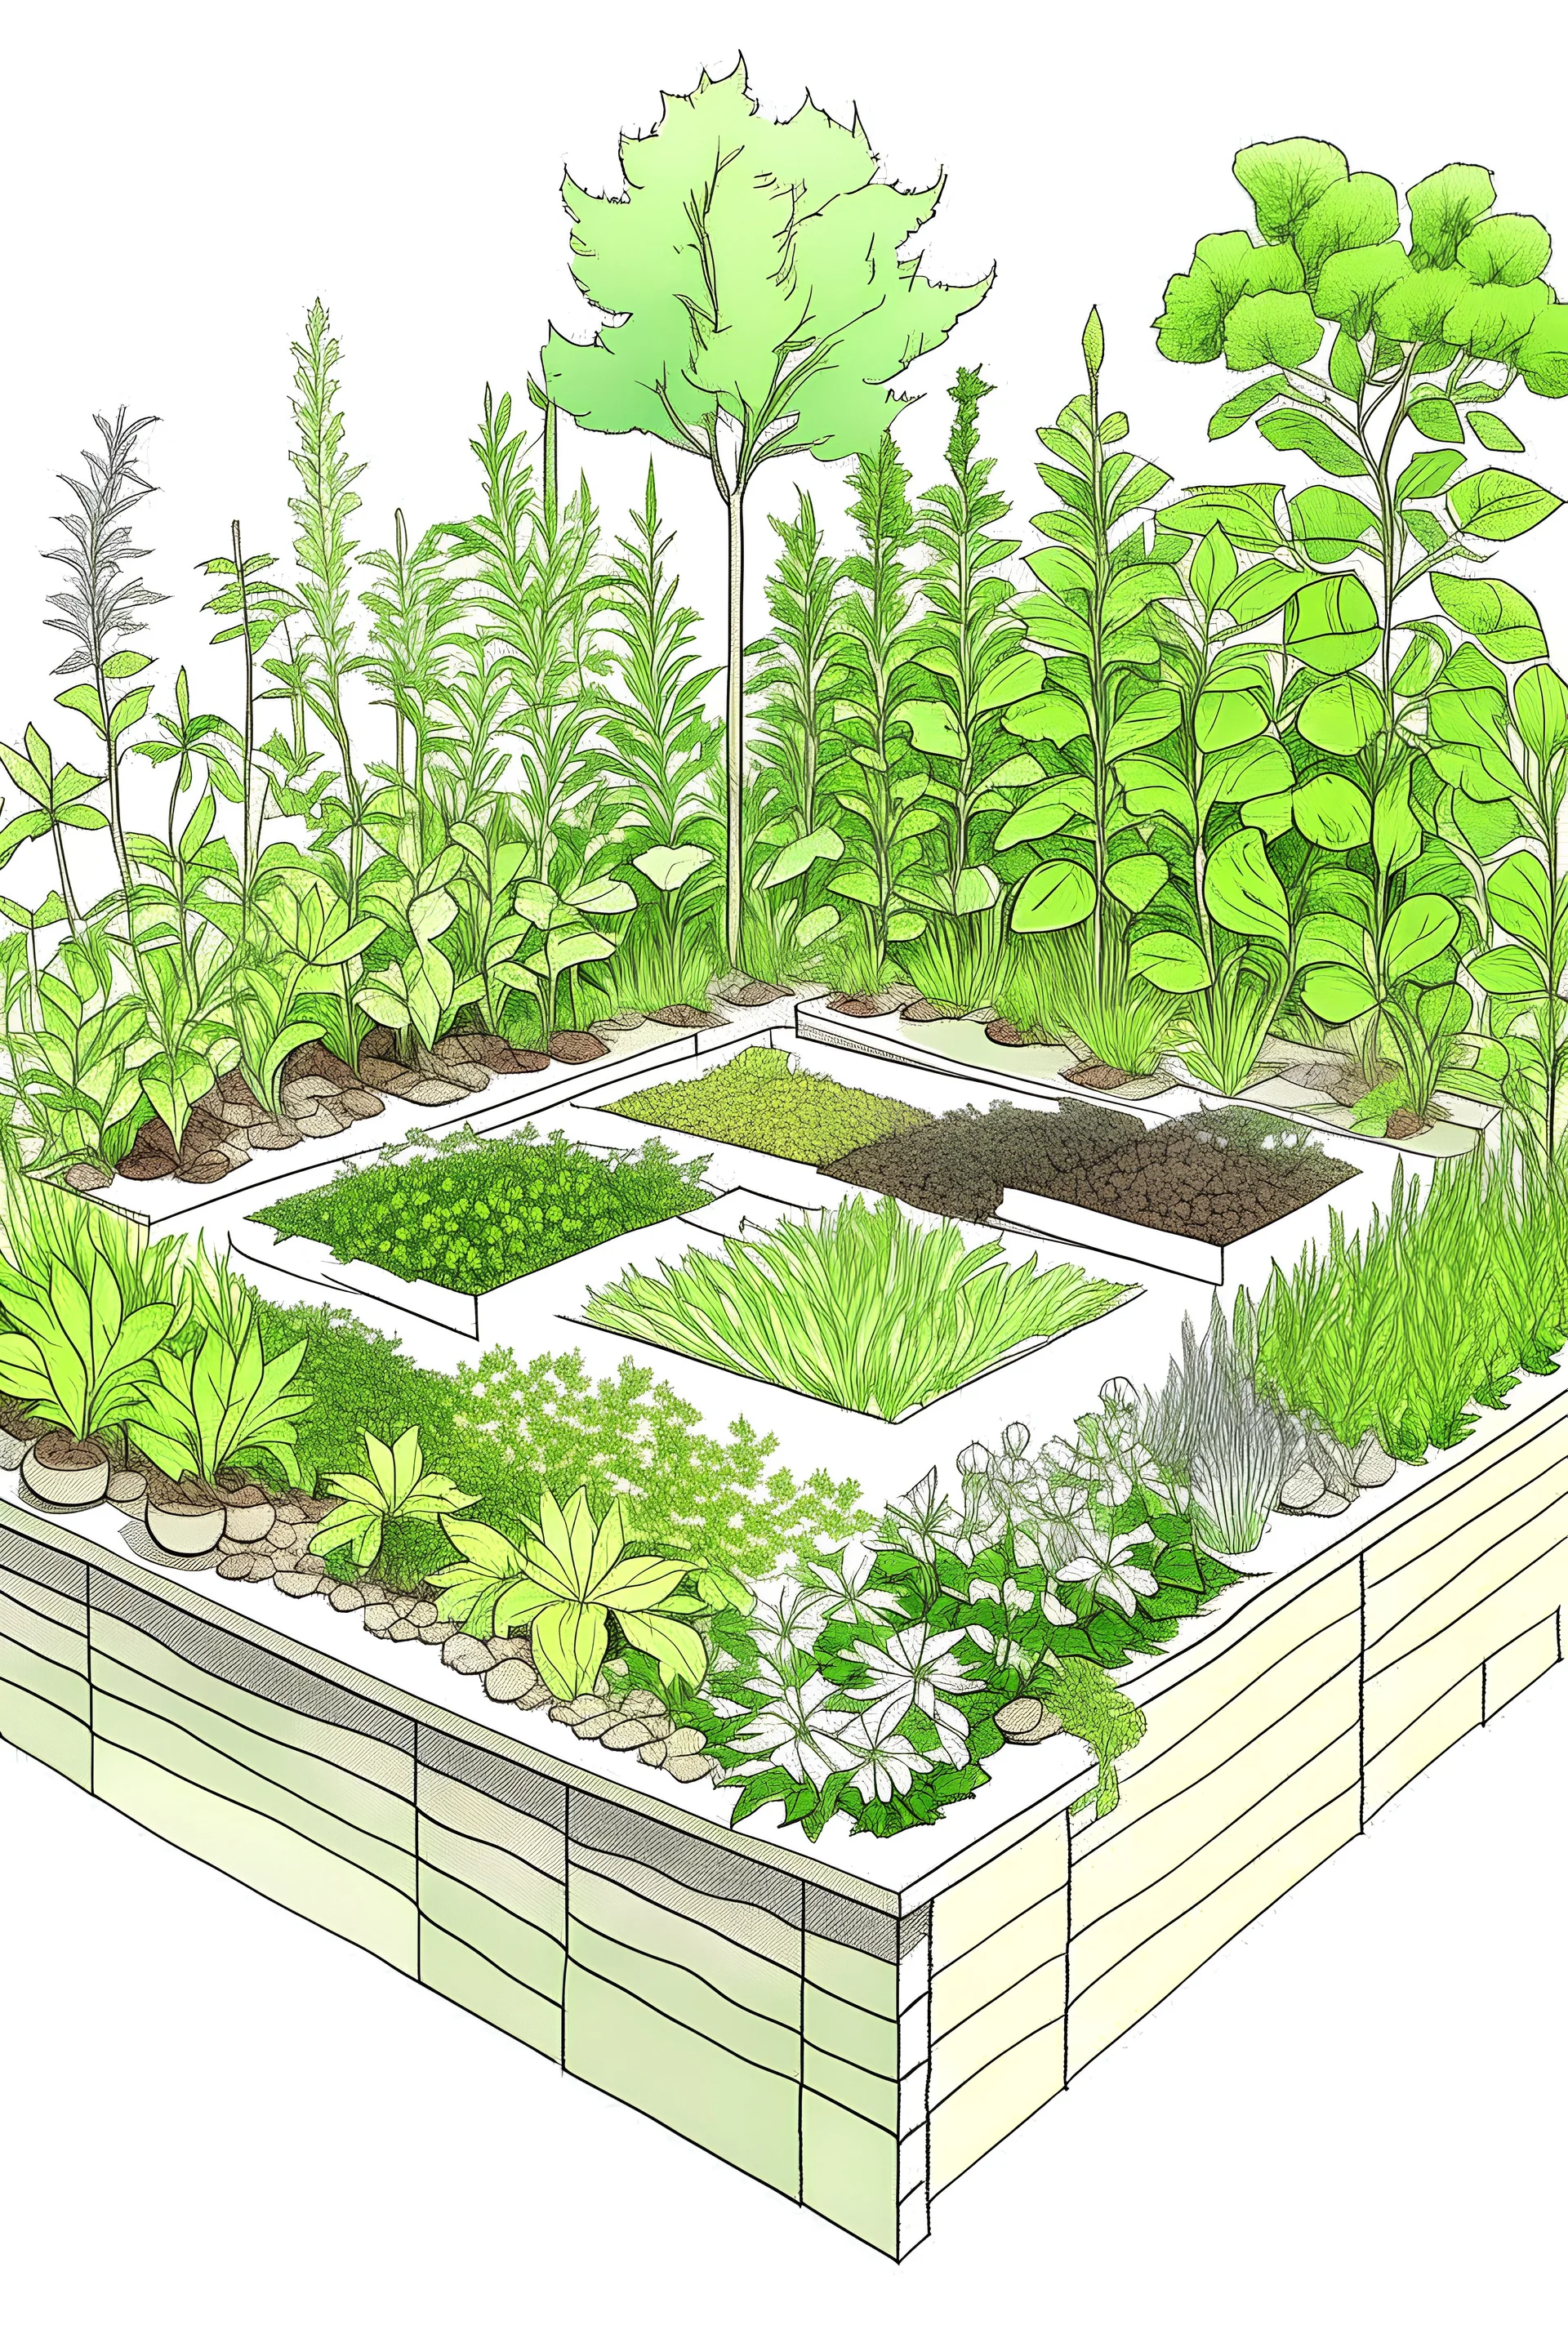 Planting a vegetable garden in a container - Lizzie Harper